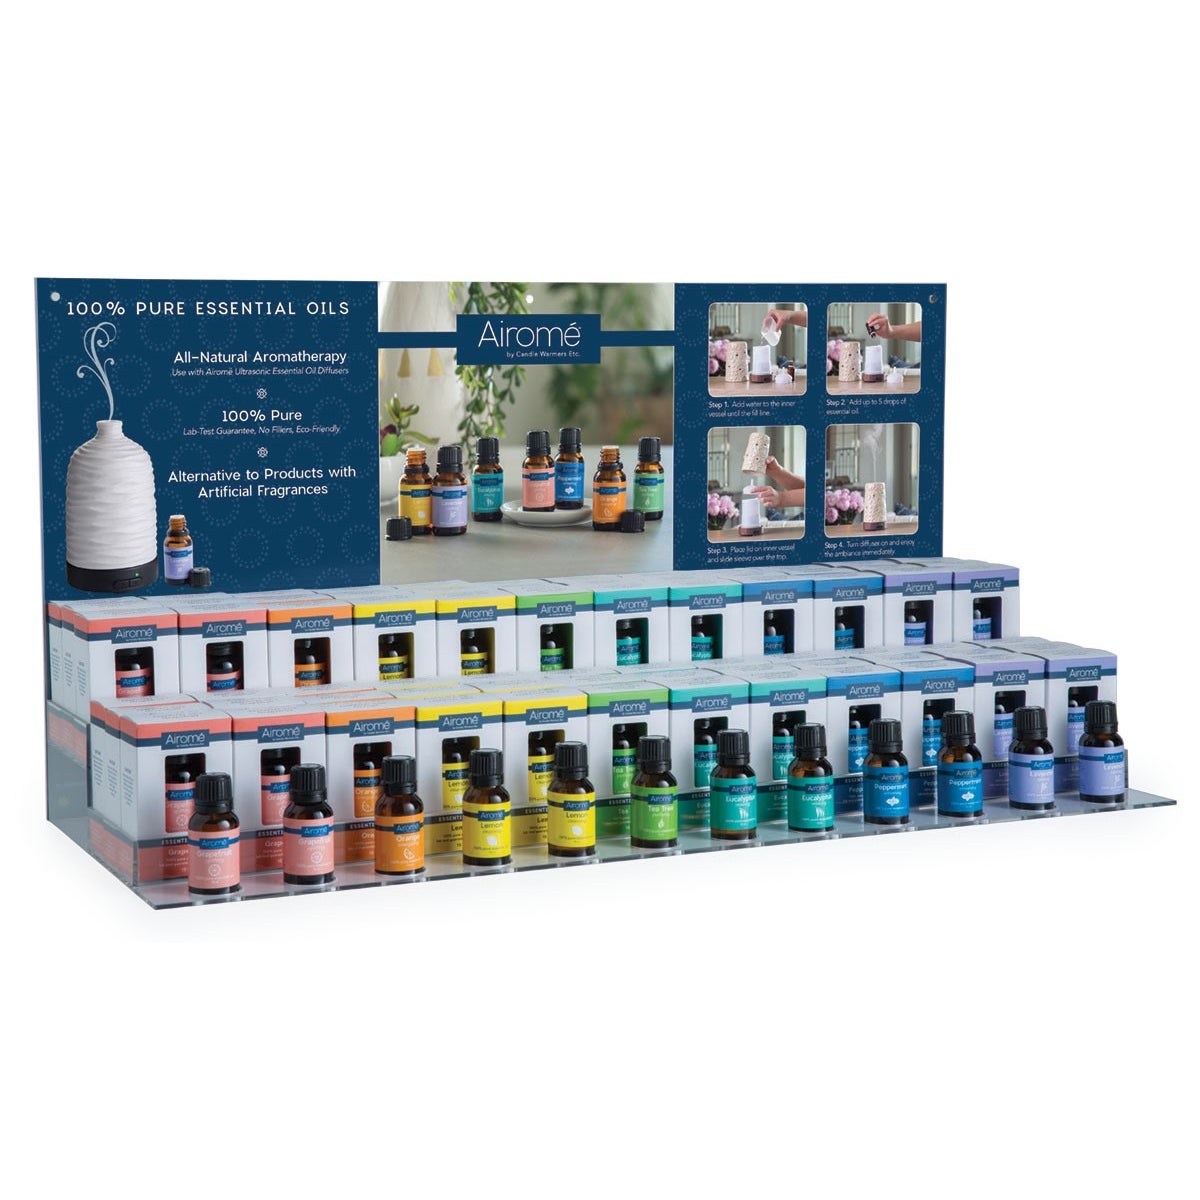 Display - Holds 72 Essential Oils